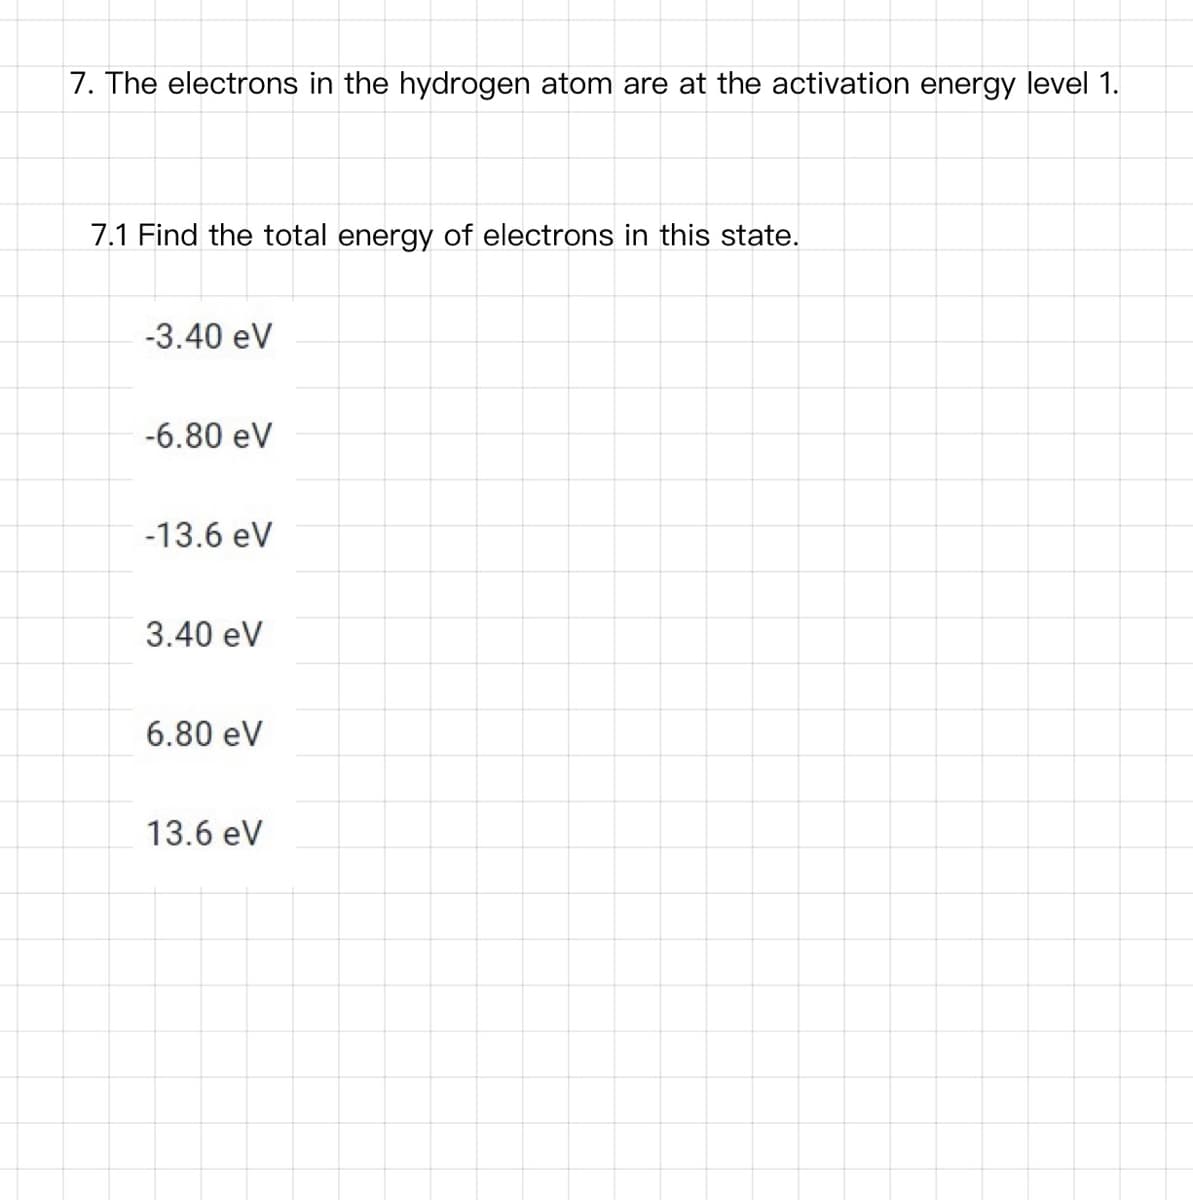 7. The electrons in the hydrogen atom are at the activation energy level 1.
7.1 Find the total energy of electrons in this state.
-3.40 eV
-6.80 eV
-13.6 eV
3.40 eV
6.80 eV
13.6 eV
